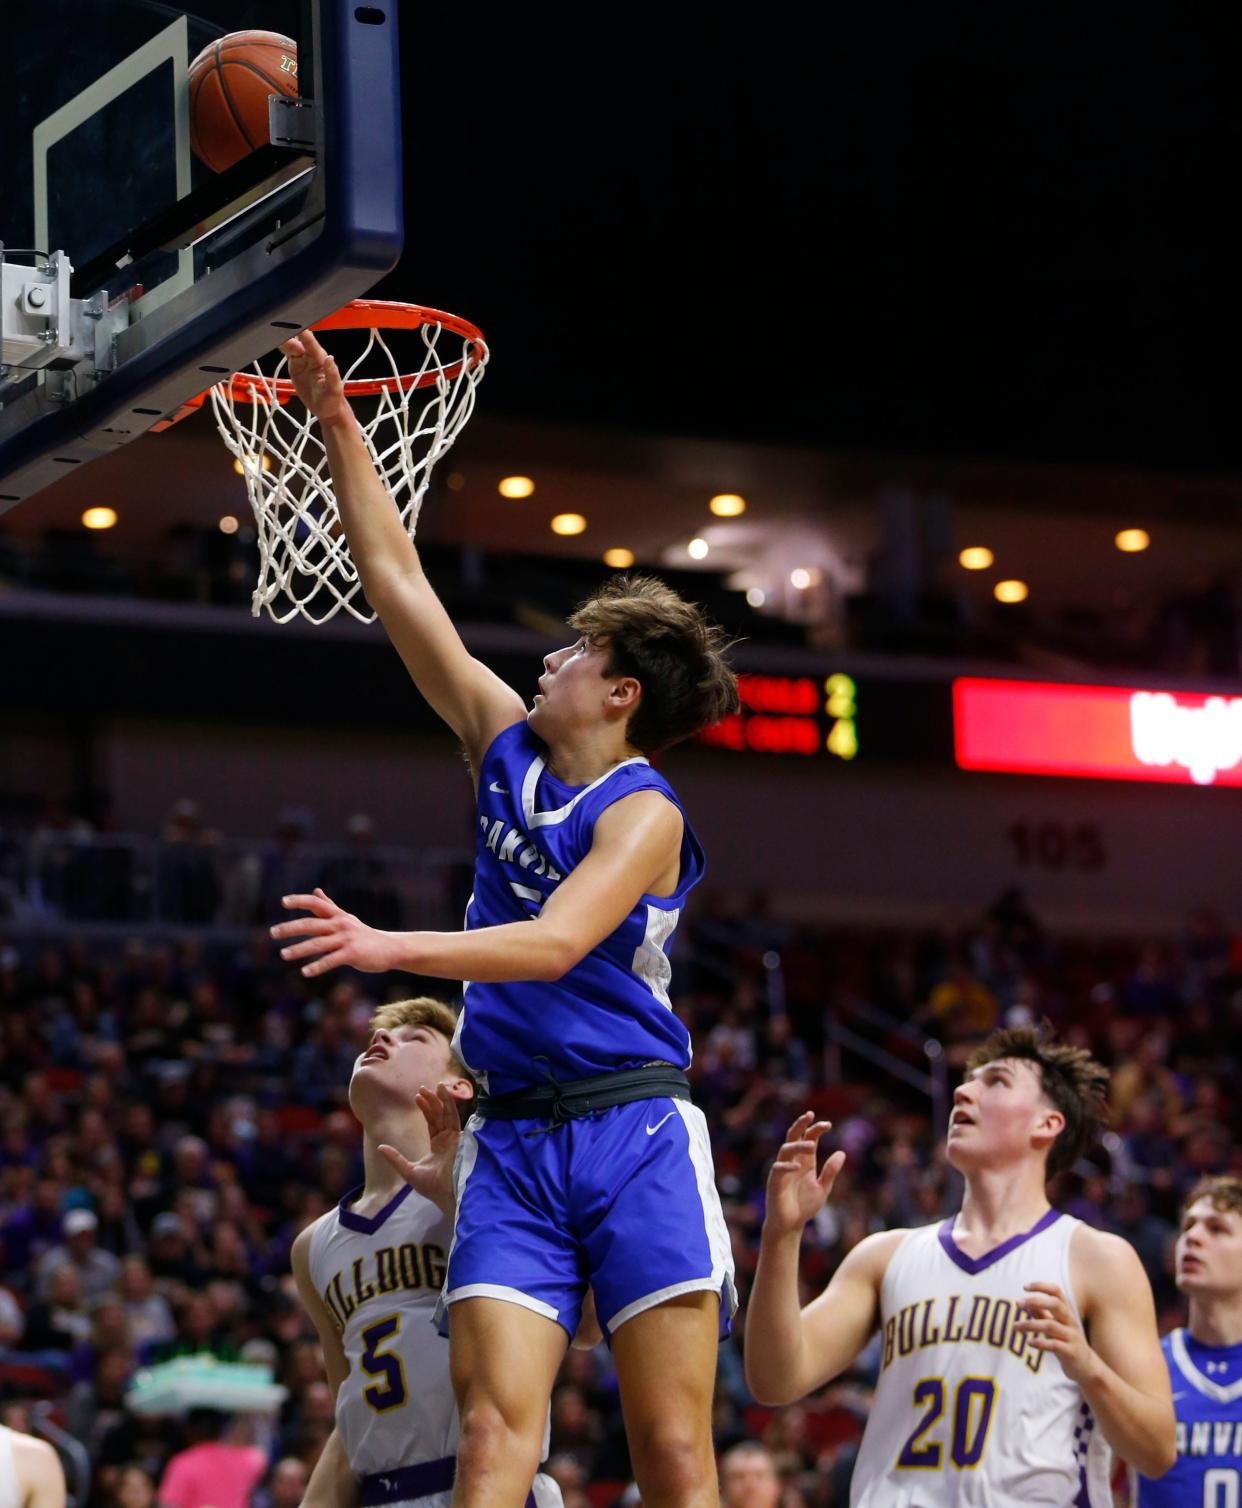 Caiden Gourley of Danville puts up a shot during a game against Lake Mills in the Iowa high school boys state basketball 1A quarterfinals at Wells Fargo Arena in Des Moines, Monday, March 7, 2022.